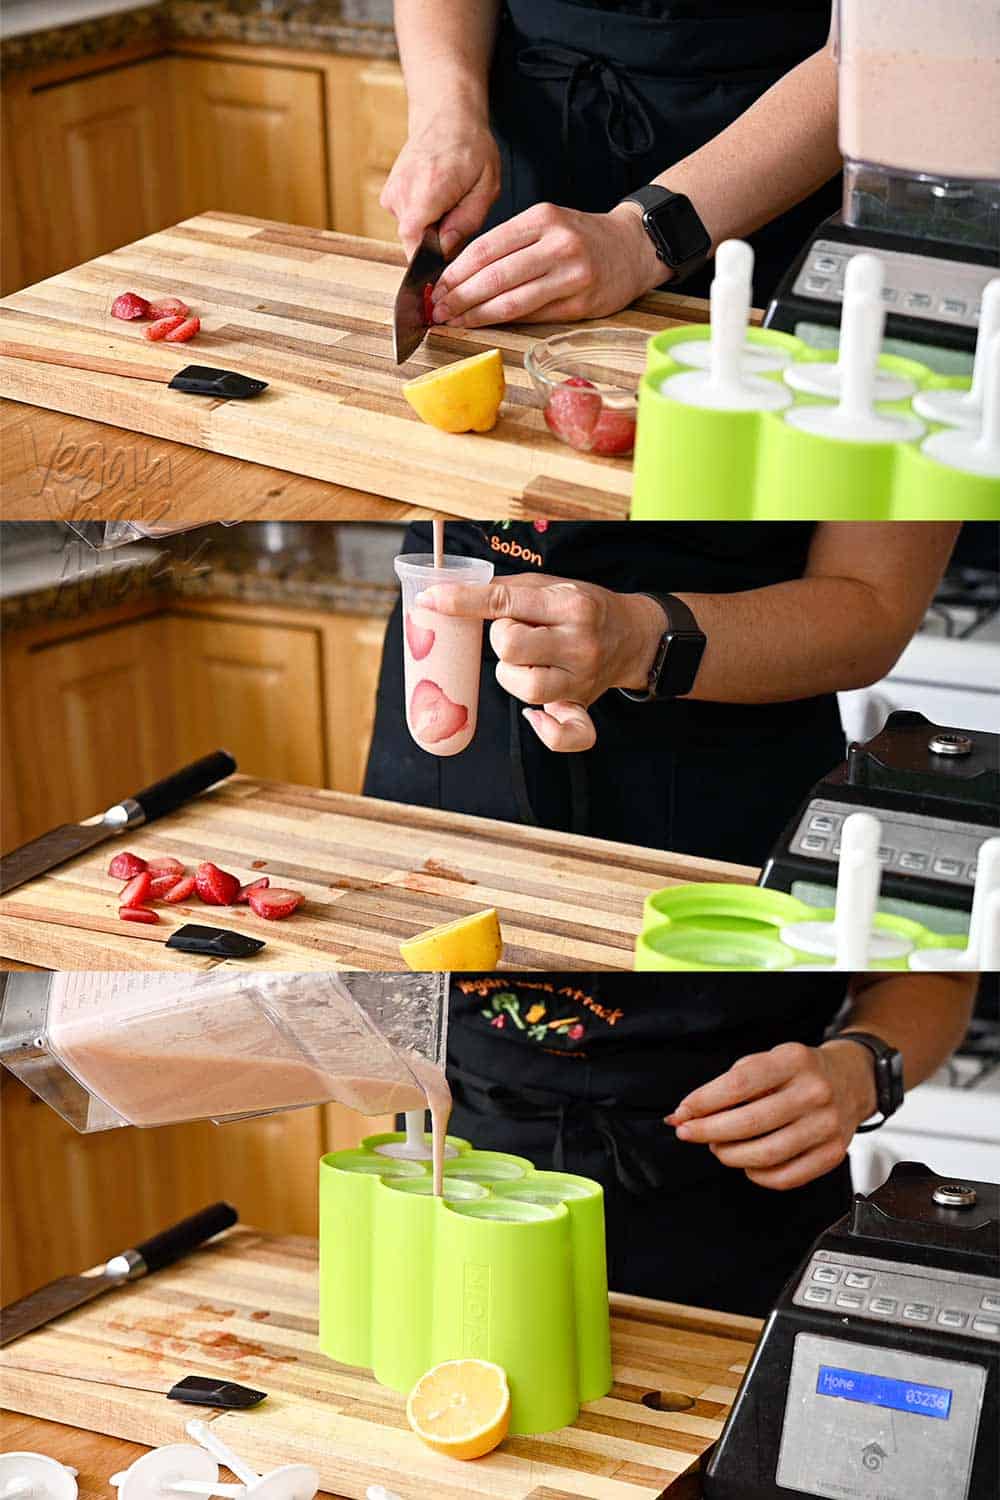 Image collage of slicing strawberries and assembling popsicles